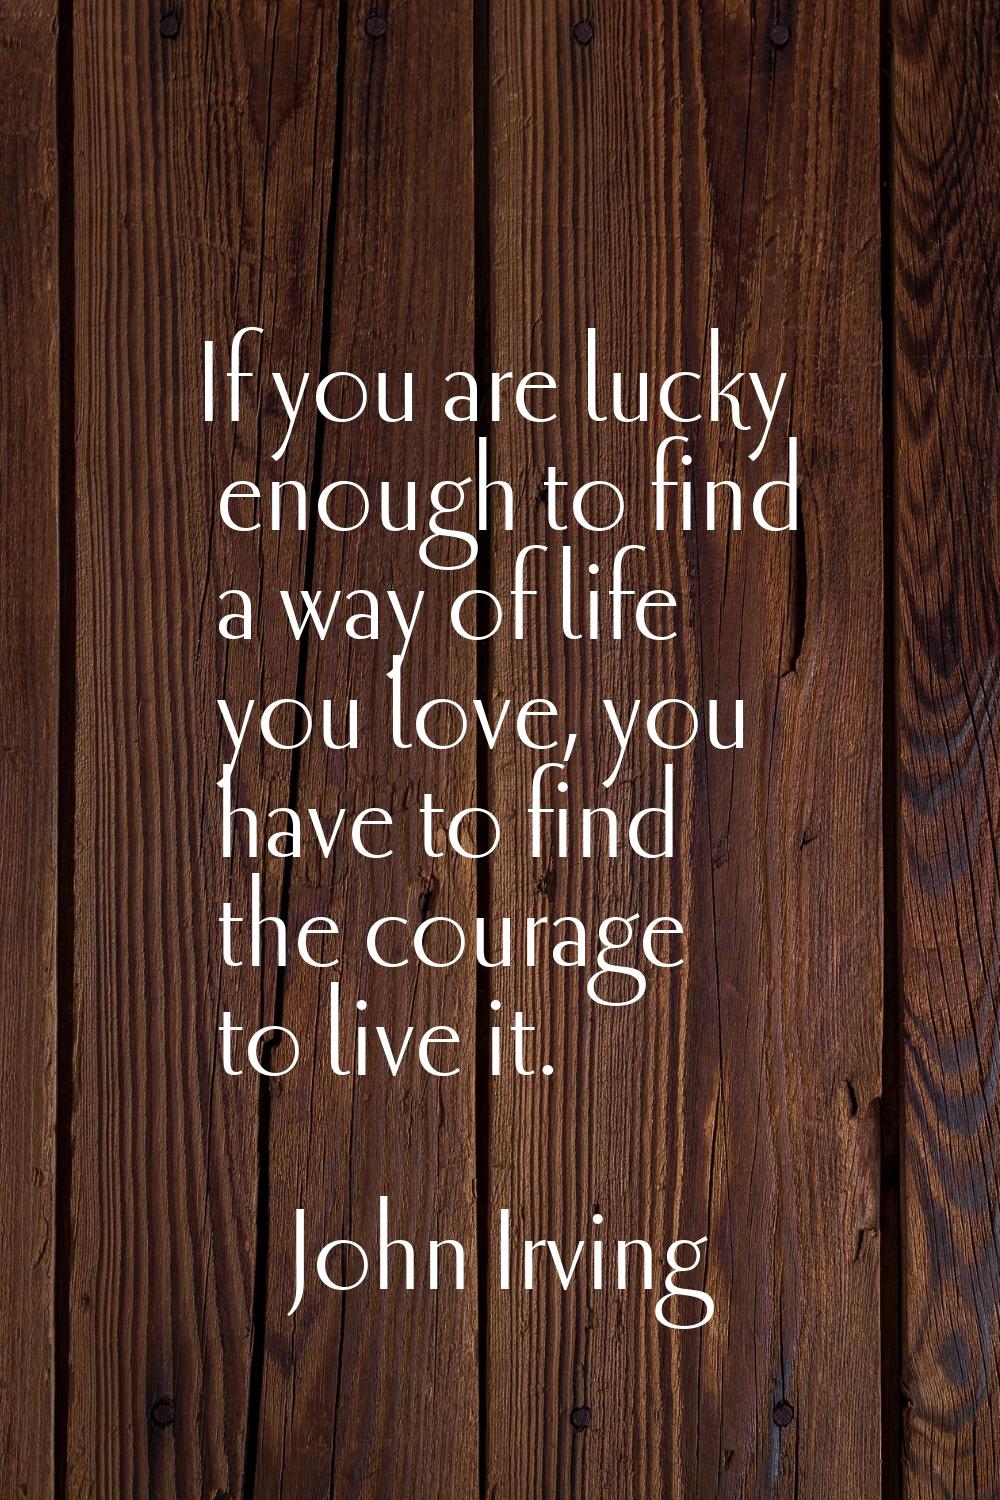 If you are lucky enough to find a way of life you love, you have to find the courage to live it.